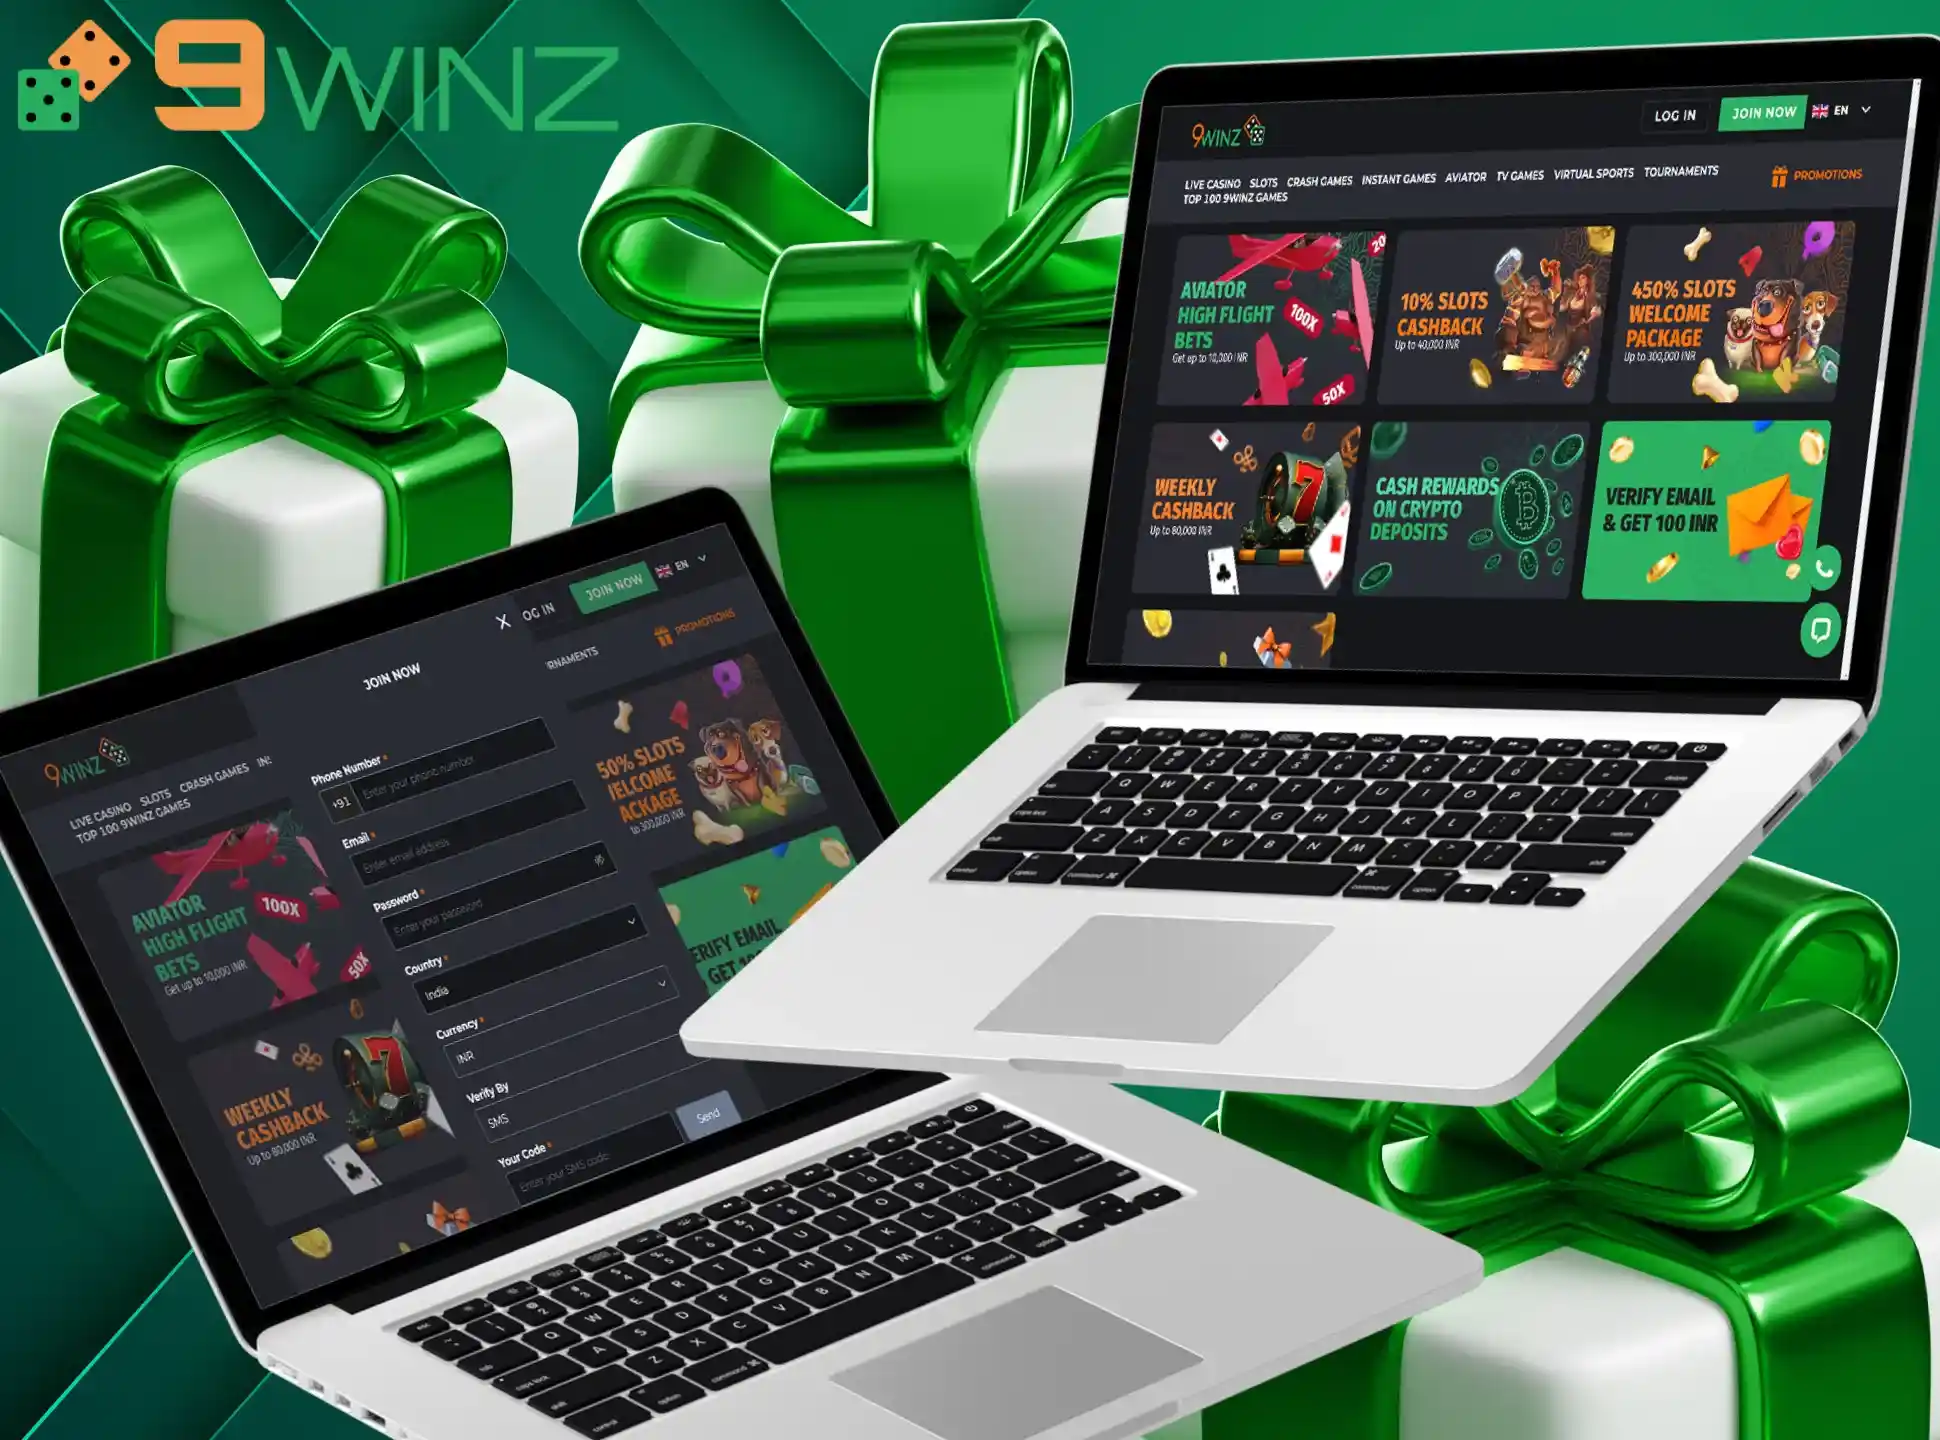 Check available 9Winz bonus package and play.